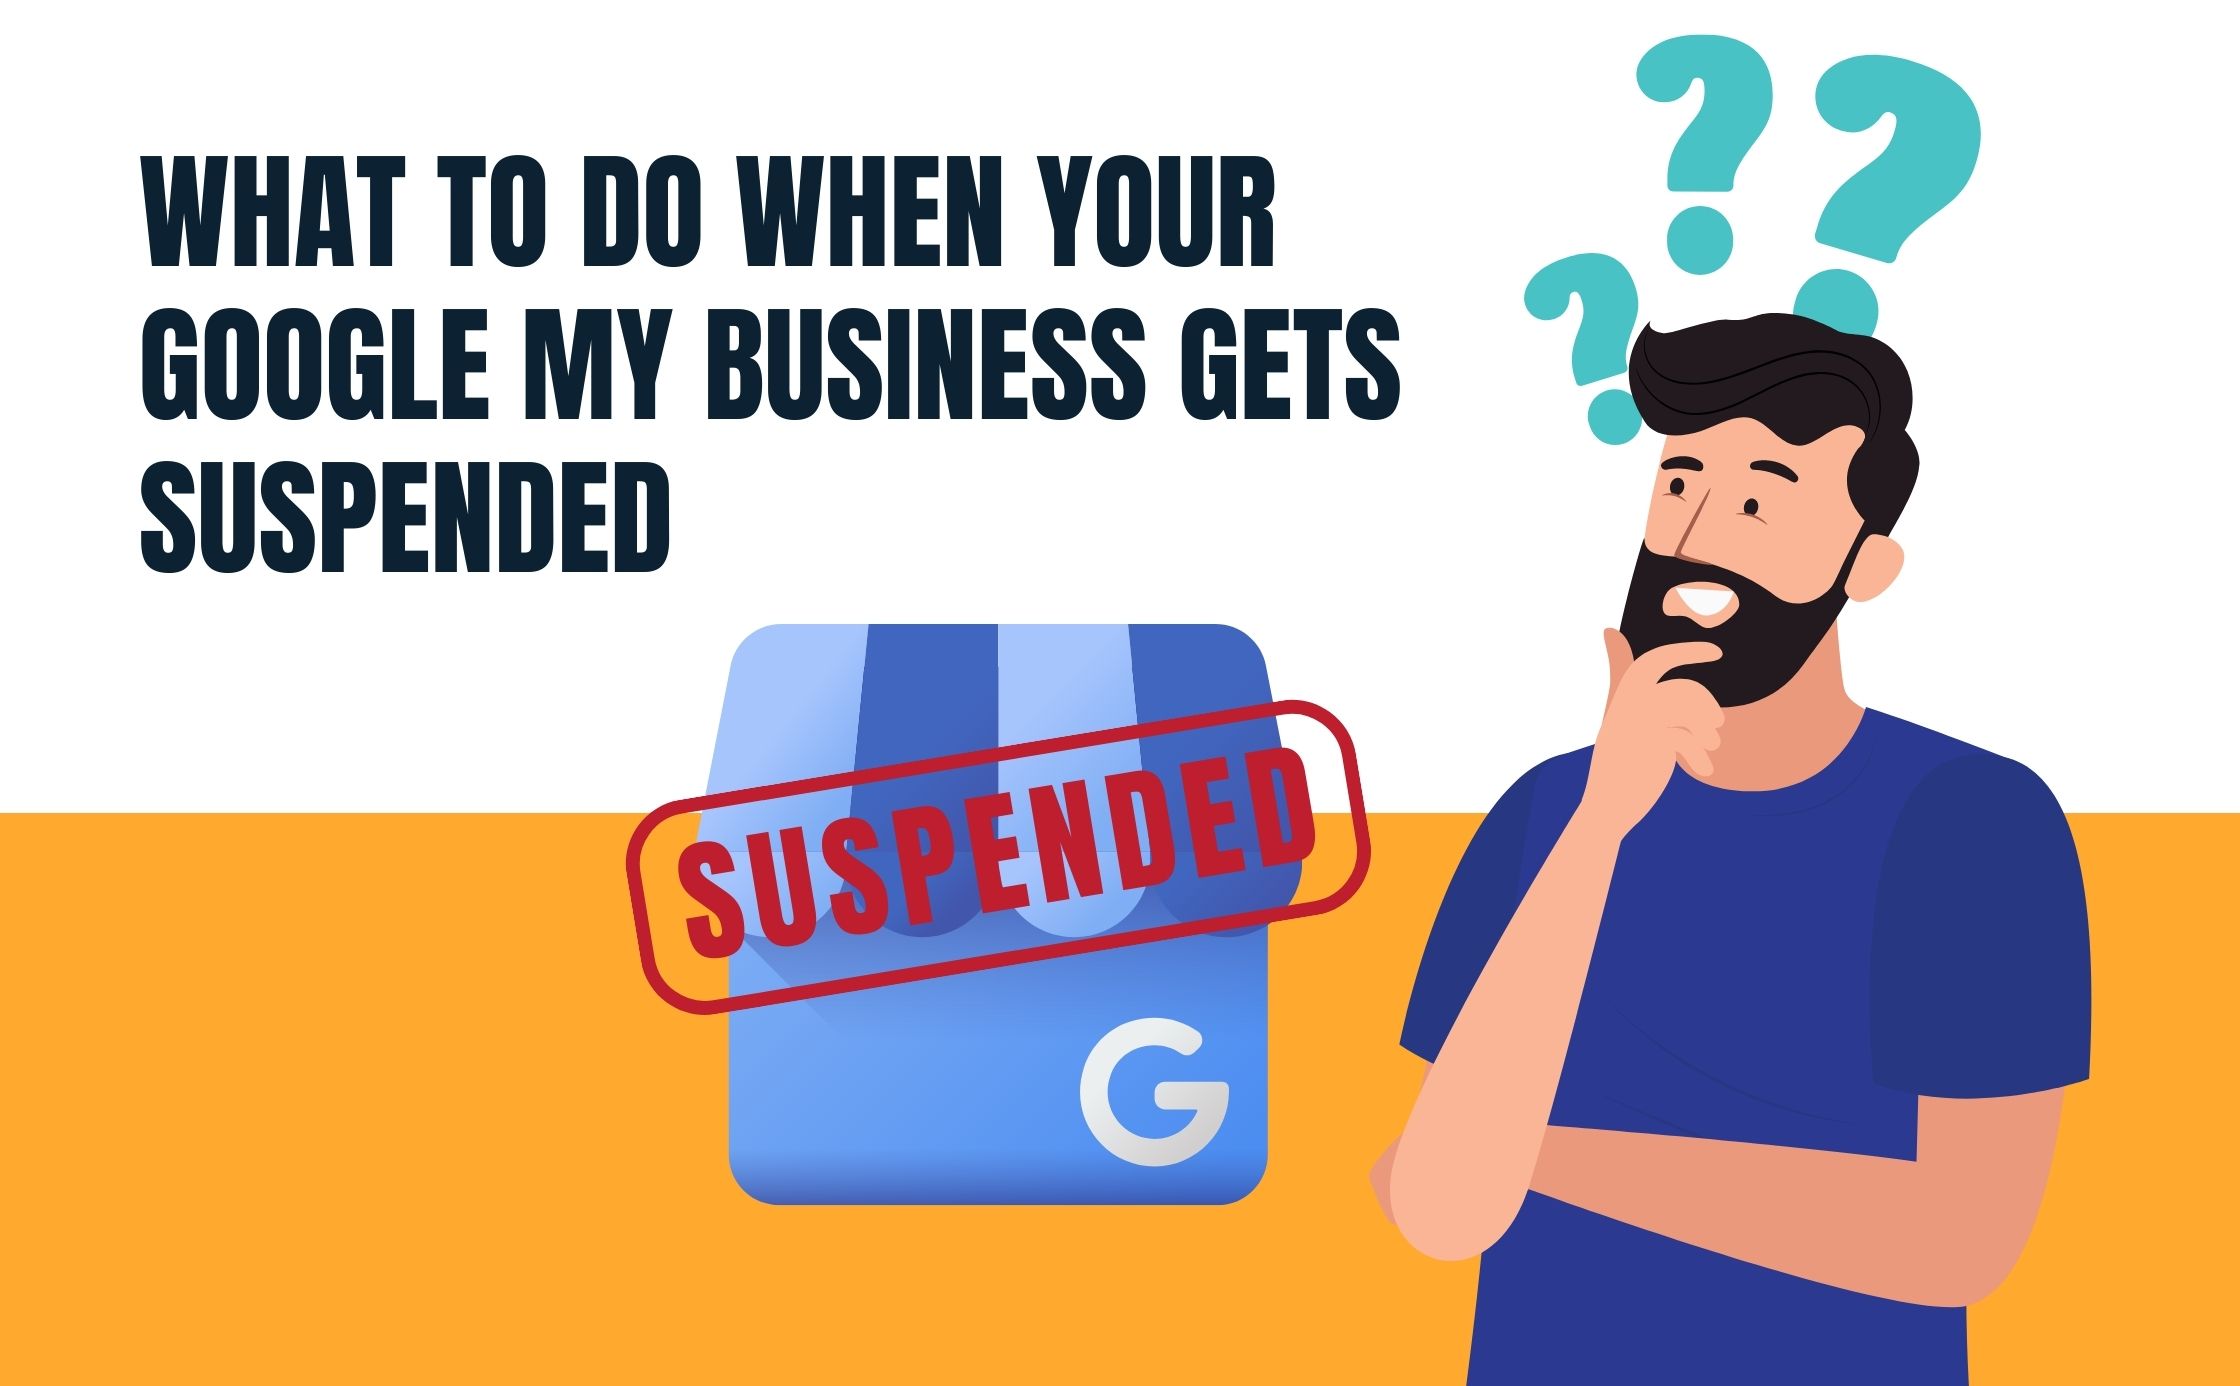 What To Do When Your Google My Business Gets Suspended